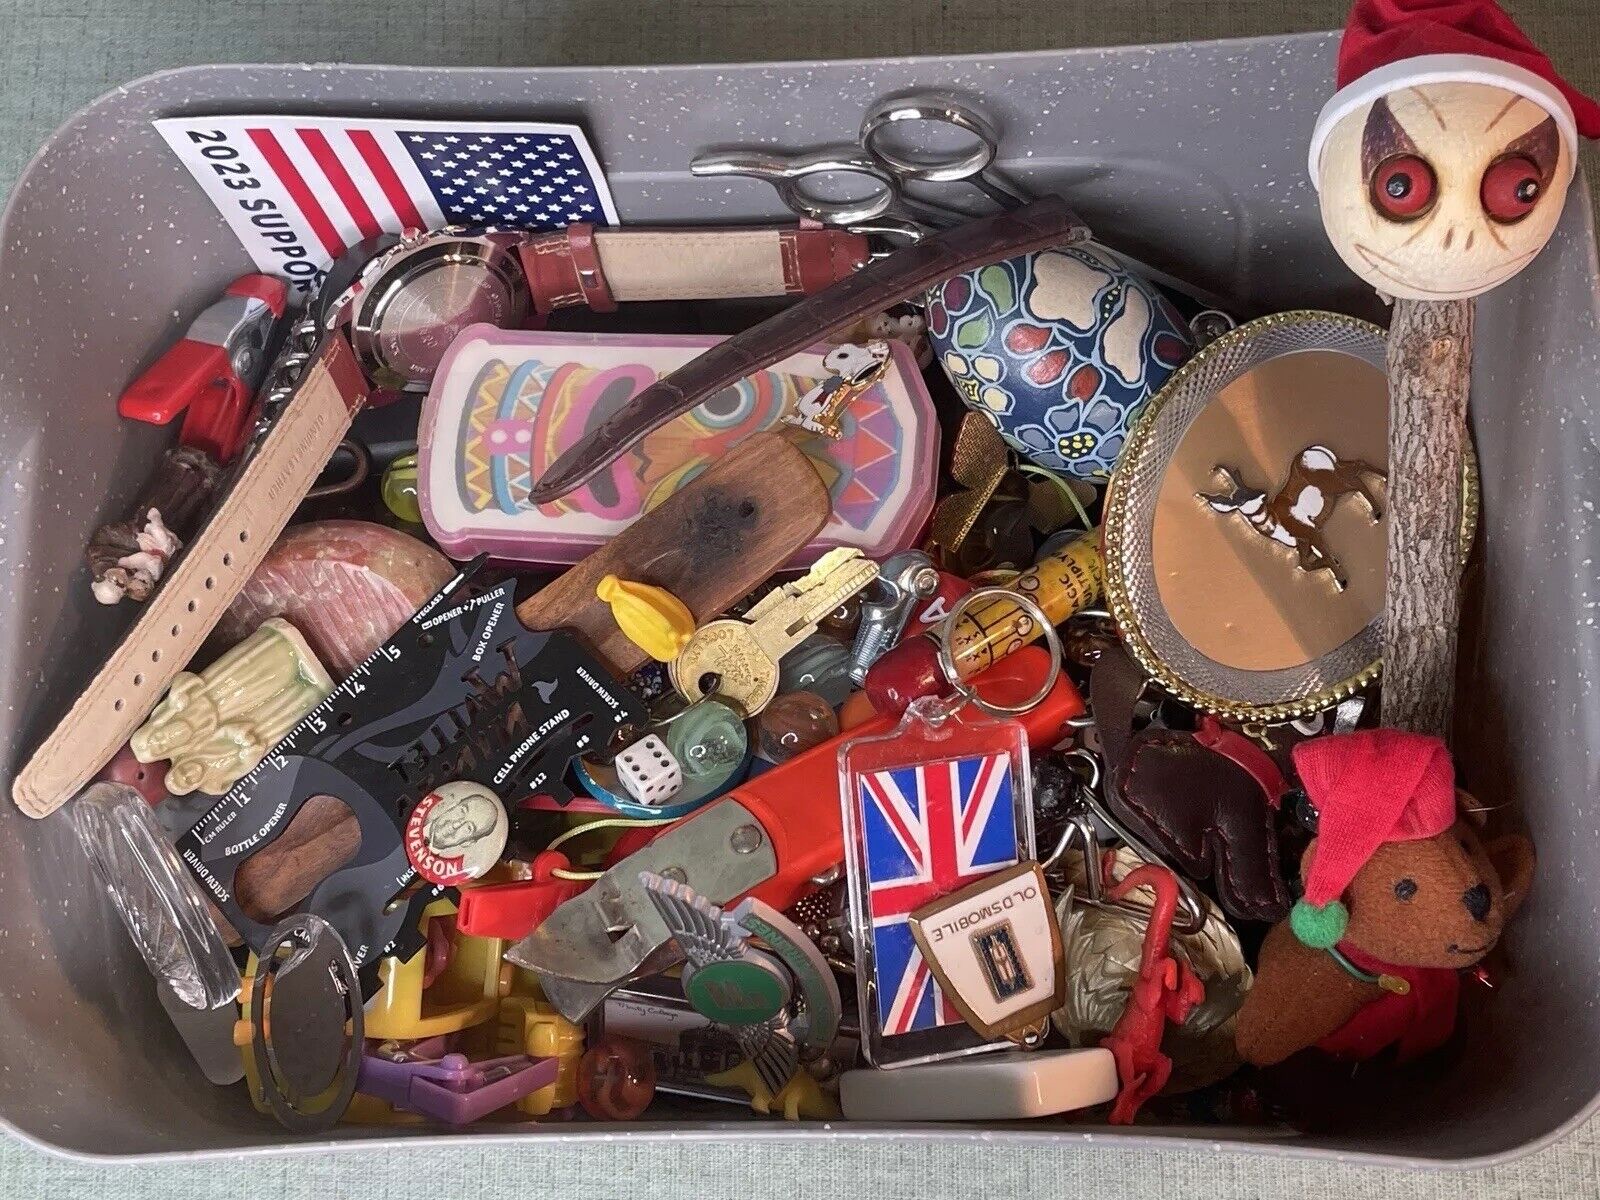 Junk Drawer Lot of Vintage and Modern Collectibles and Oddities 7lbs